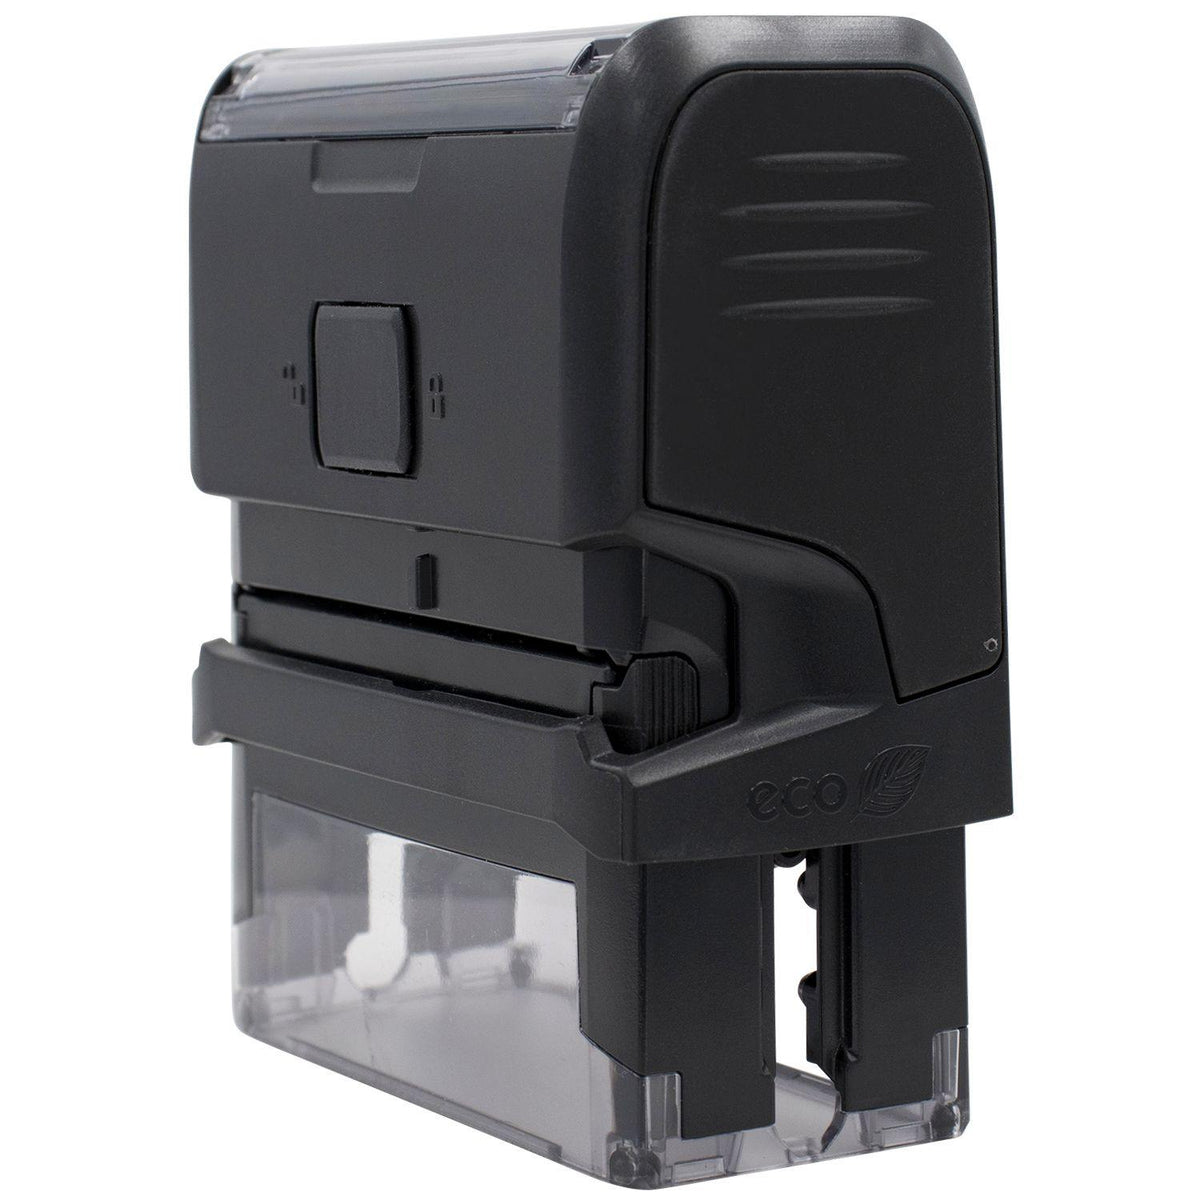 Large Self Inking Late Stamp - Engineer Seal Stamps - Brand_Trodat, Impression Size_Large, Stamp Type_Self-Inking Stamp, Type of Use_Teacher